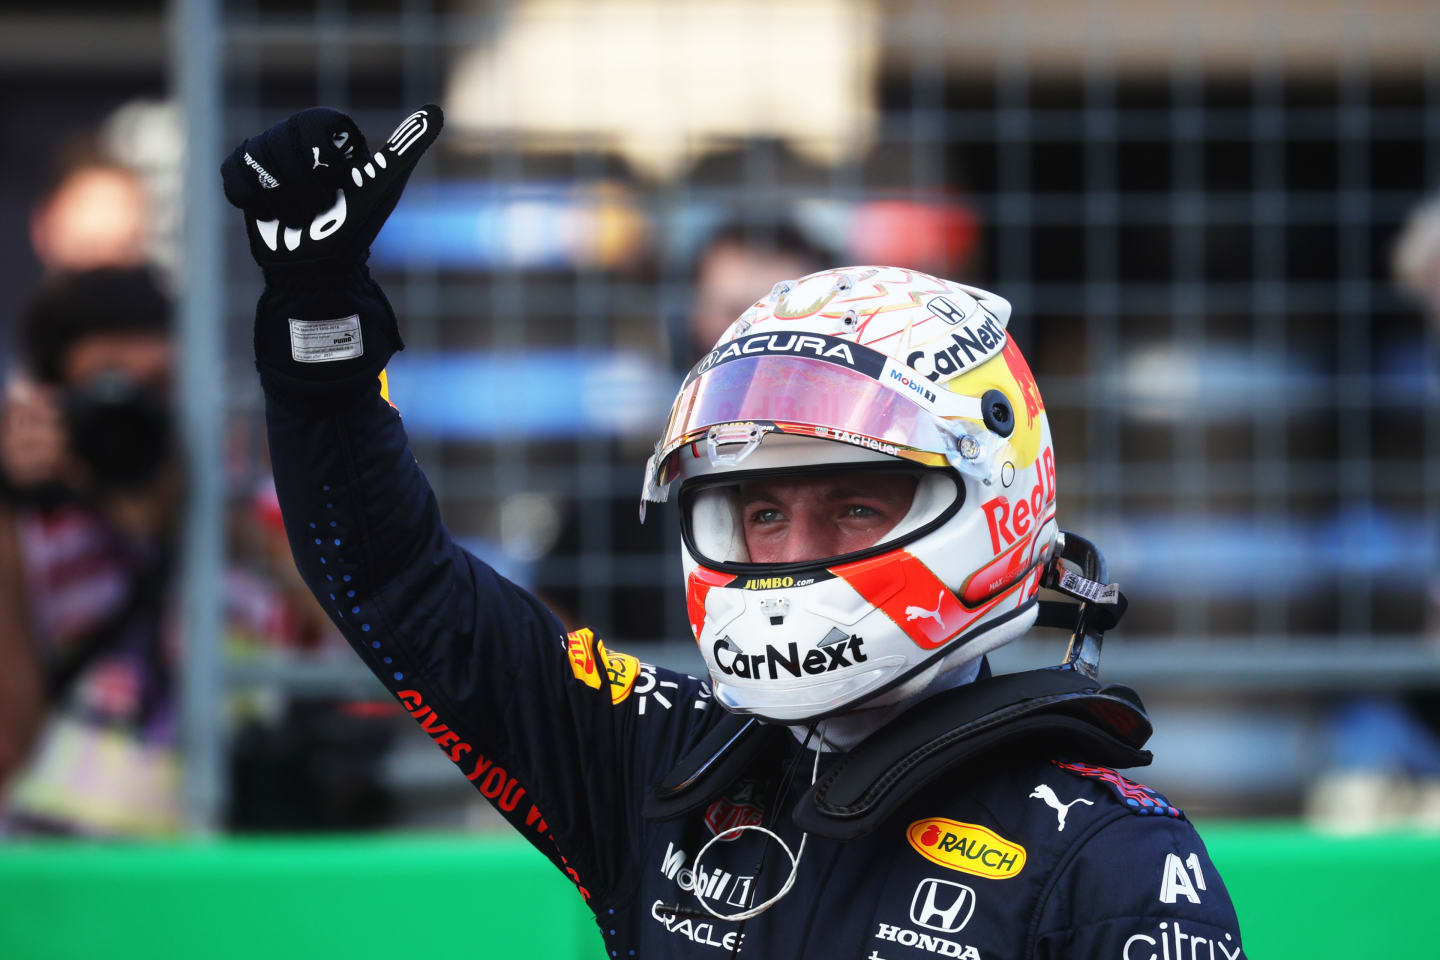 AUSTIN, TEXAS - OCTOBER 23: Pole position qualifier Max Verstappen of Netherlands and Red Bull Racing celebrates in parc ferme during qualifying ahead of the F1 Grand Prix of USA at Circuit of The Americas on October 23, 2021 in Austin, Texas. (Photo by Chris Graythen/Getty Images)